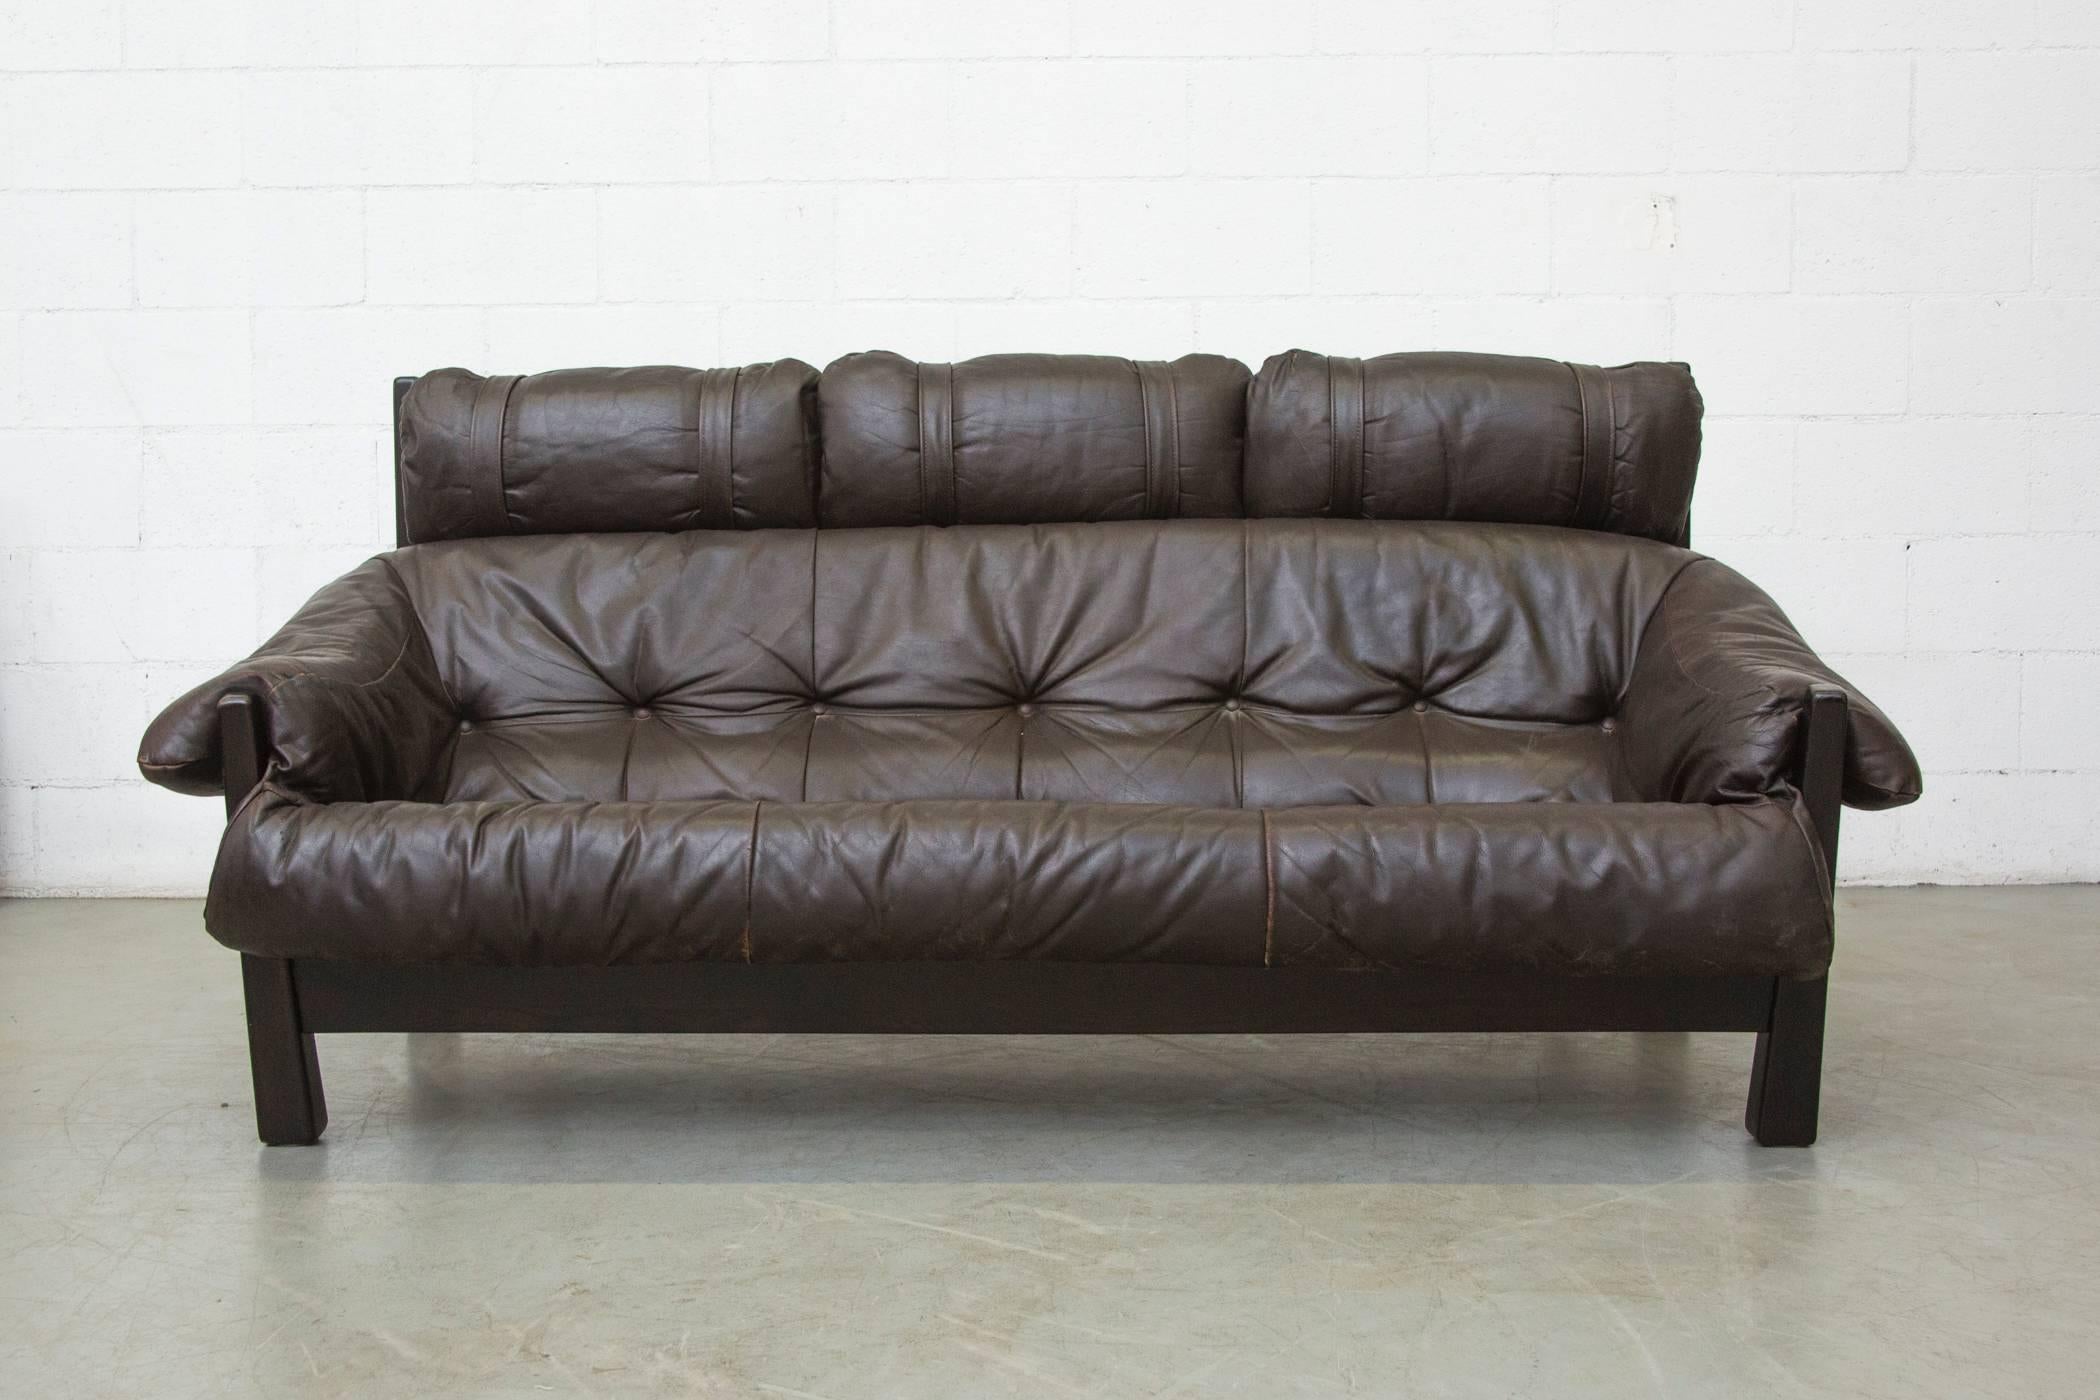 Gerard Van Den Berg leather sofa in dark chocolate colored leather with great patina and heavy wood frame. Smart tension strap support system. Single matching lounge chair and ottoman available. Listed separately.